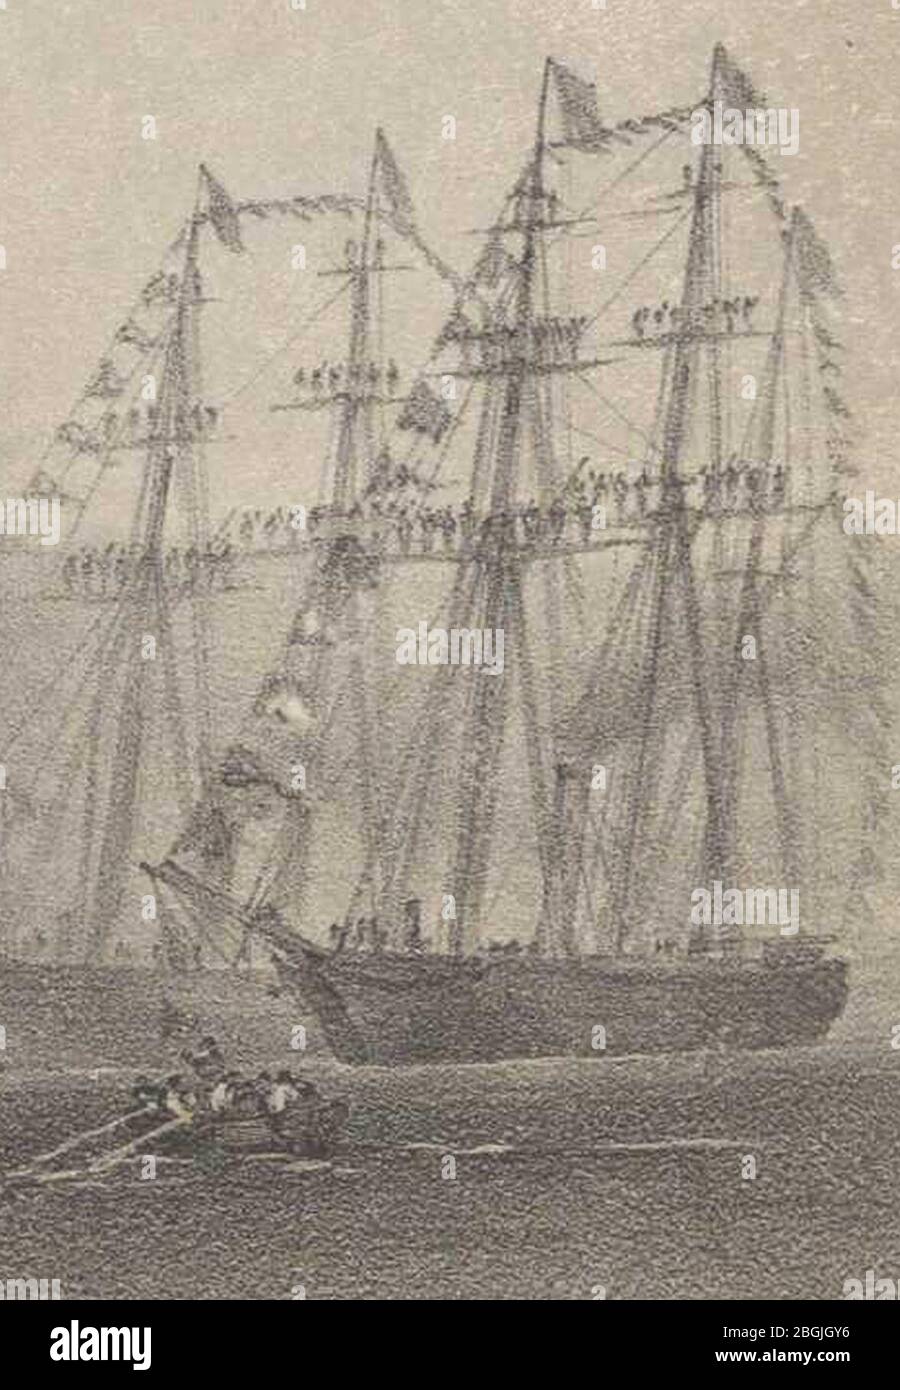 HMS Alacrity (detail), at Gravesend, February 2nd 1858 - Stock Photo